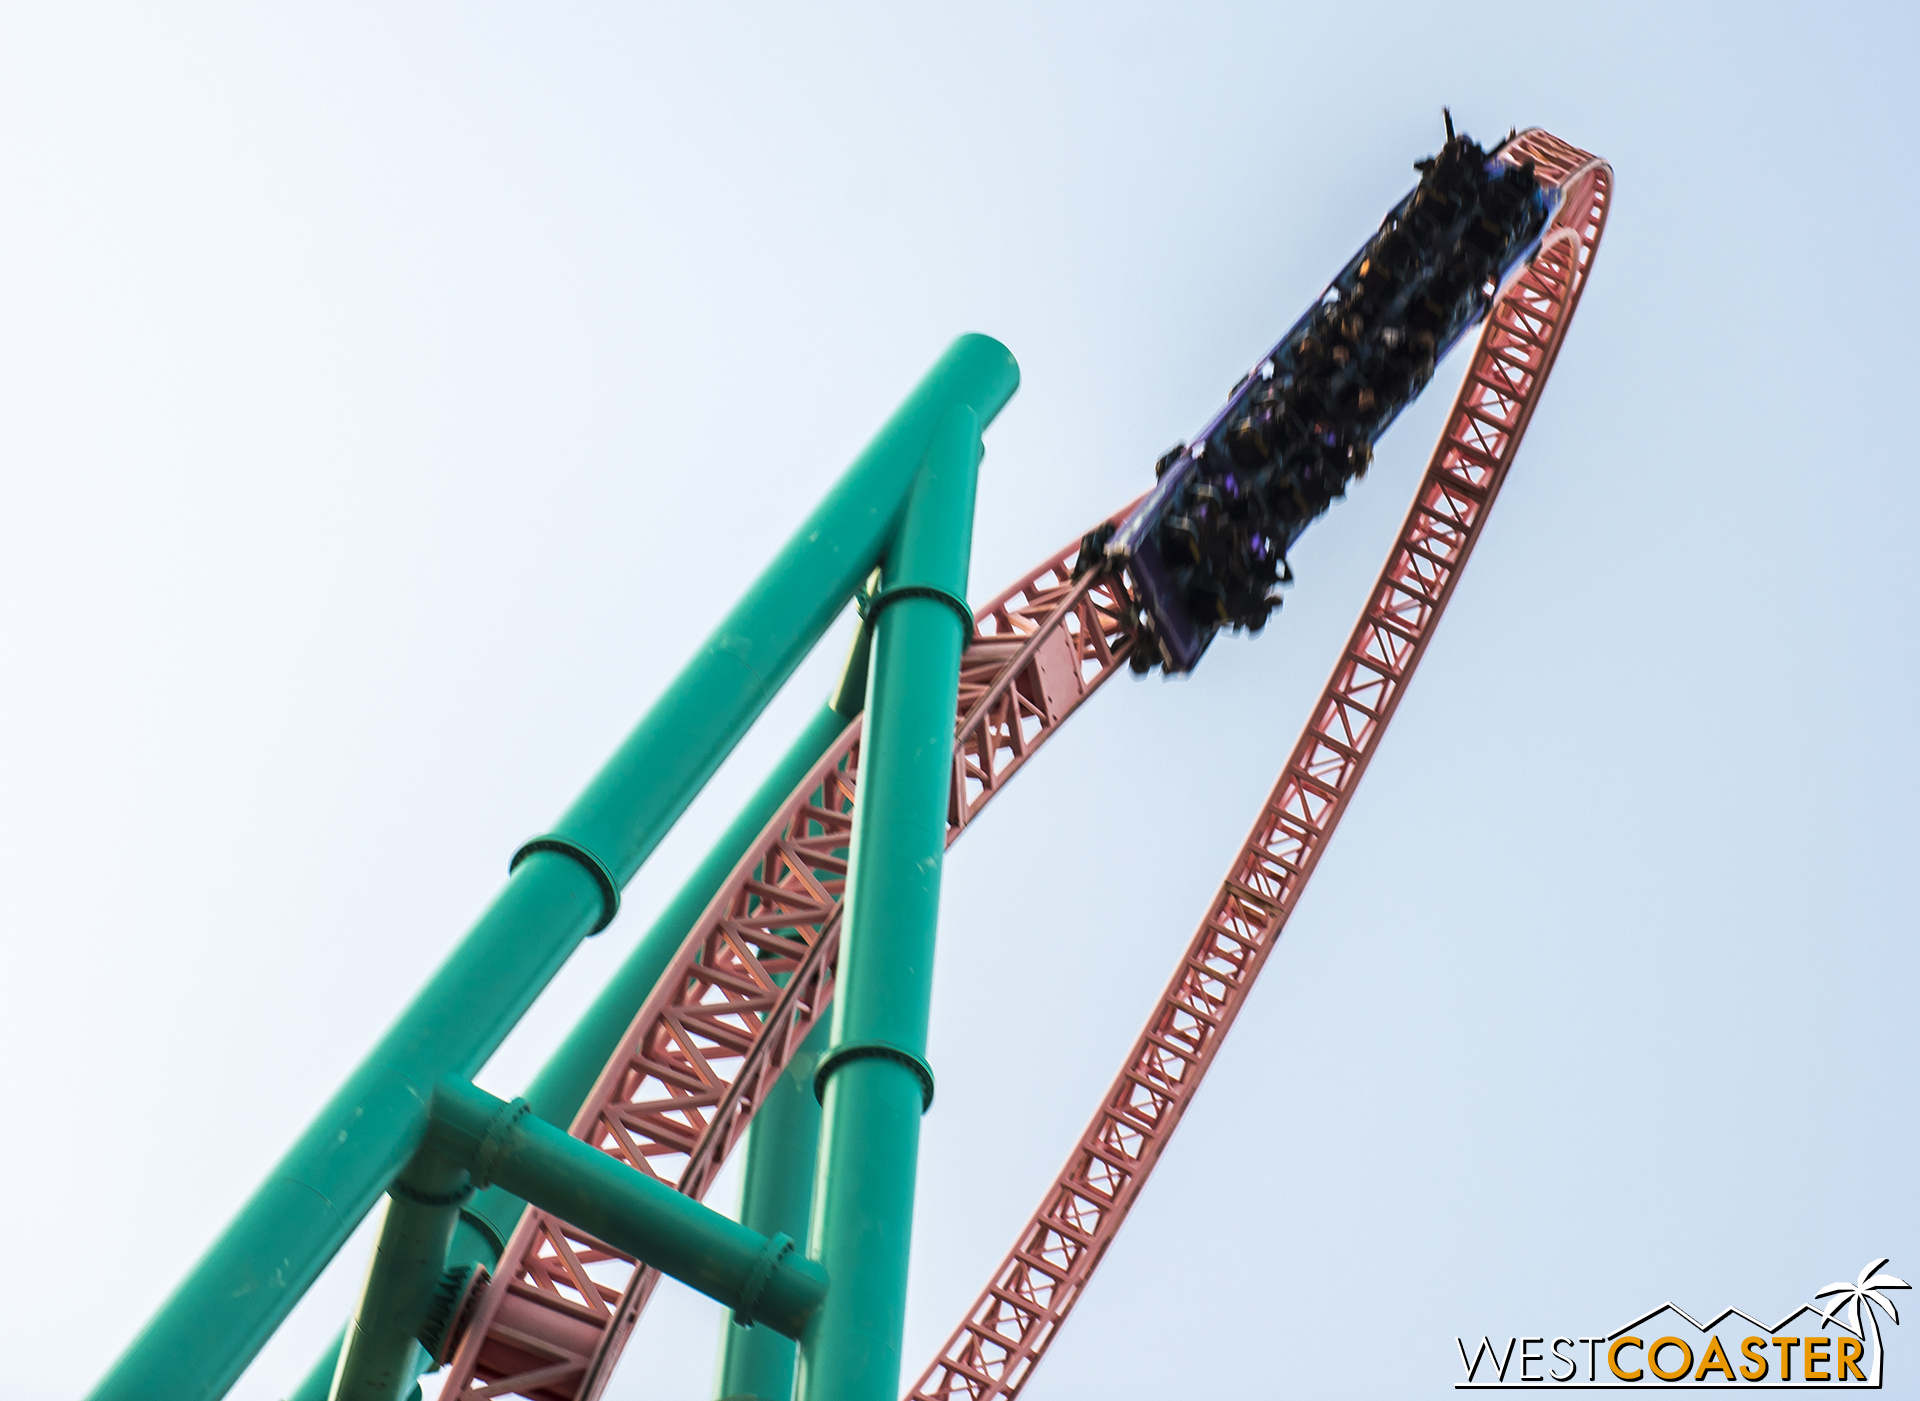  And also Xcelerator, which reopened last month after a very lengthy downtime. 